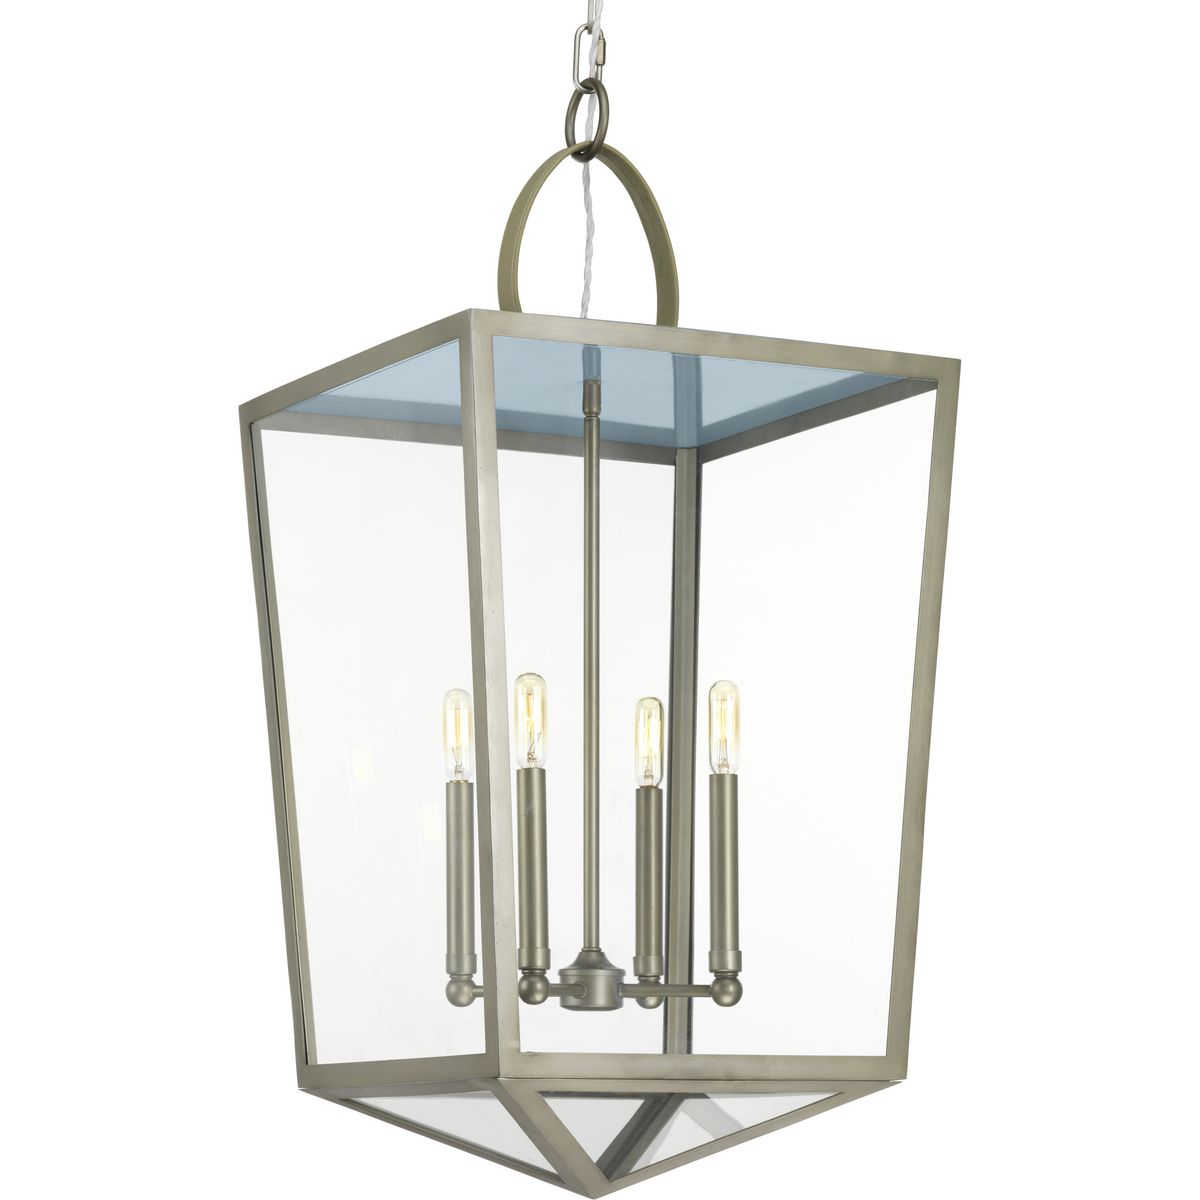 The Shearwater series embodies designer Jeffrey Alan Mark�s love of easy coastal living. With true California style, the Shearwater pendant is an Antique Nickel lantern trimmed with a signature Maliblue accent, giving an unexpected pop of color inside the roof of the fixture. Bespoke details include a handsome beige topstitched leather handle. Clear glass shades surround a four-light candelabra to complete the look. This family of fixtures is part of the Jeffrey Alan Marks Point Dume� lighting collection which celebrates a curated mix of yesterday and today, distilling both industrial and artisanal influences.